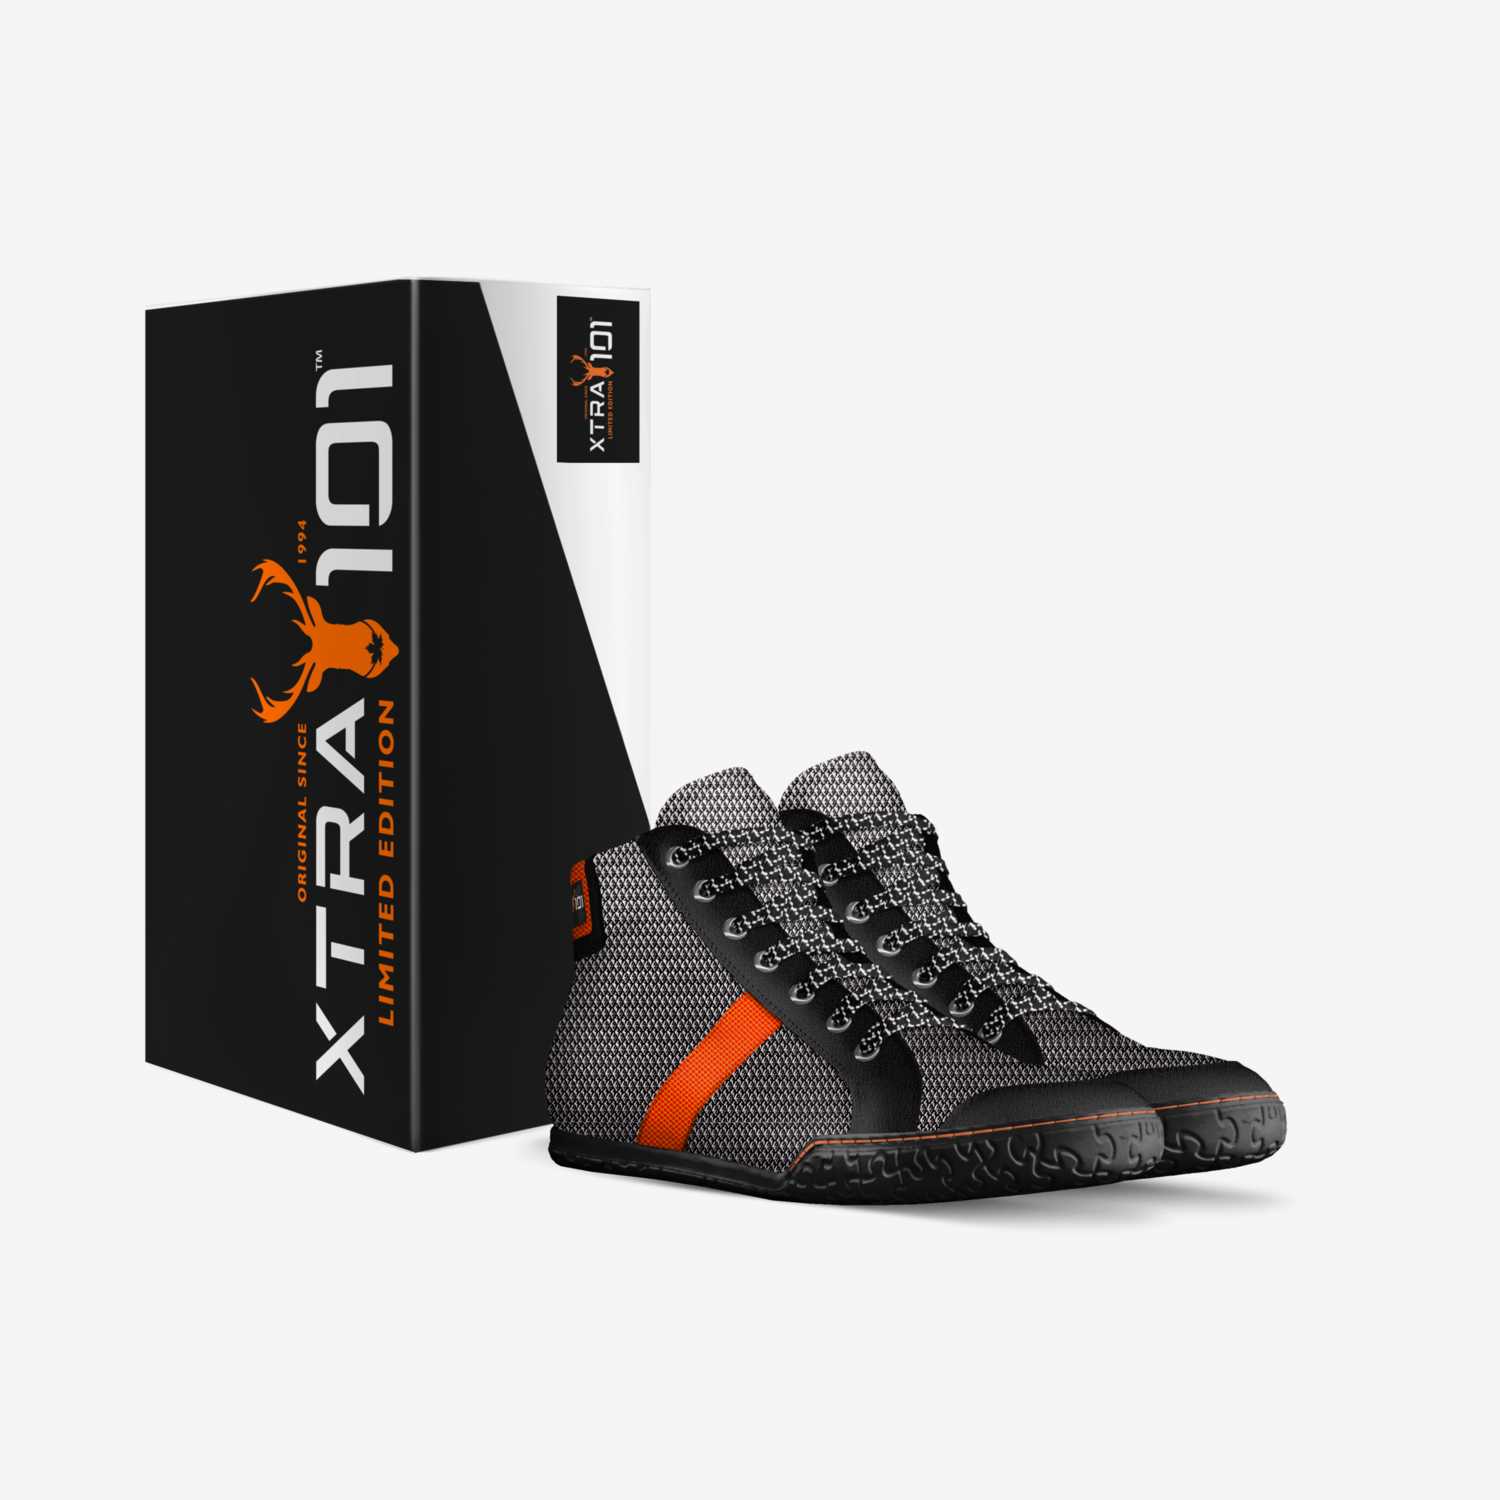 XTRA 101 custom made in Italy shoes by Matthew Hilton | Box view